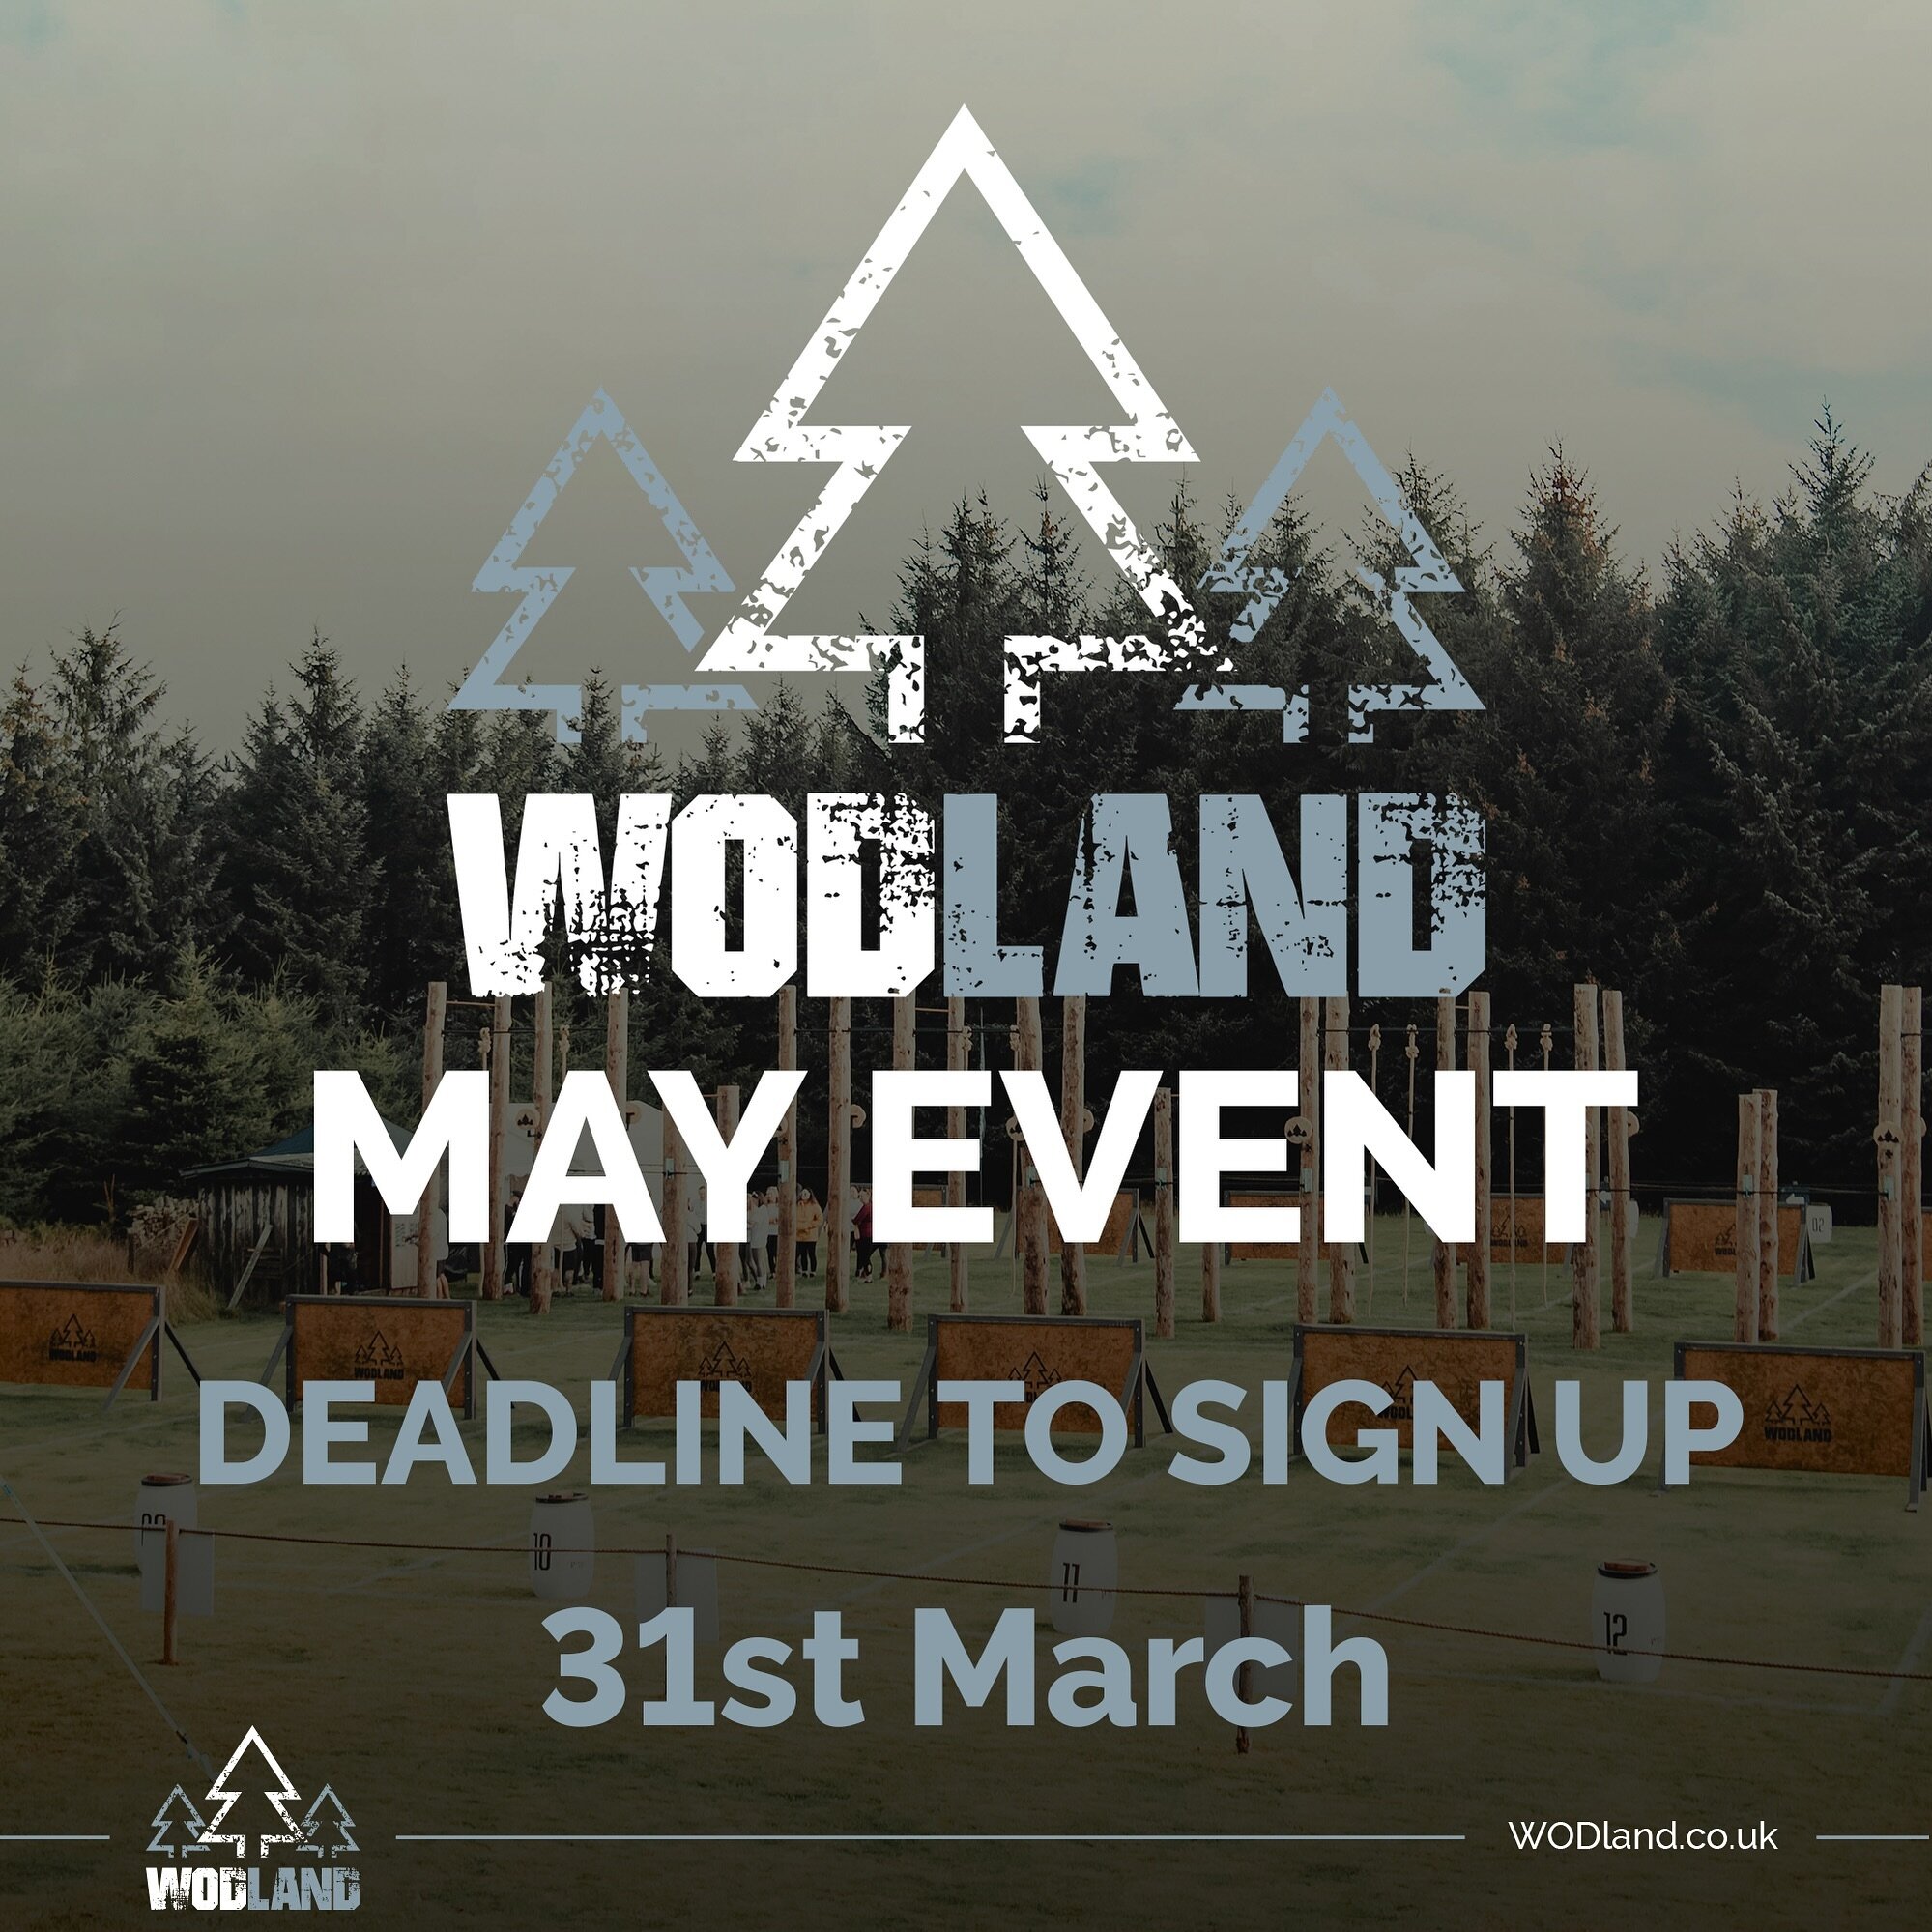 🌲MAY EVENT DEADLINE nearly here🌲

💥If you haven&rsquo;t yet signed up for our May event. You have until midnight on Sunday 31st March💥

🗓️Teams of 3 - Saturday 18th May
🗓️Masters Pairs - Sunday 19th May
🗓️Teens Pairs - Sunday 19th May

Go via 